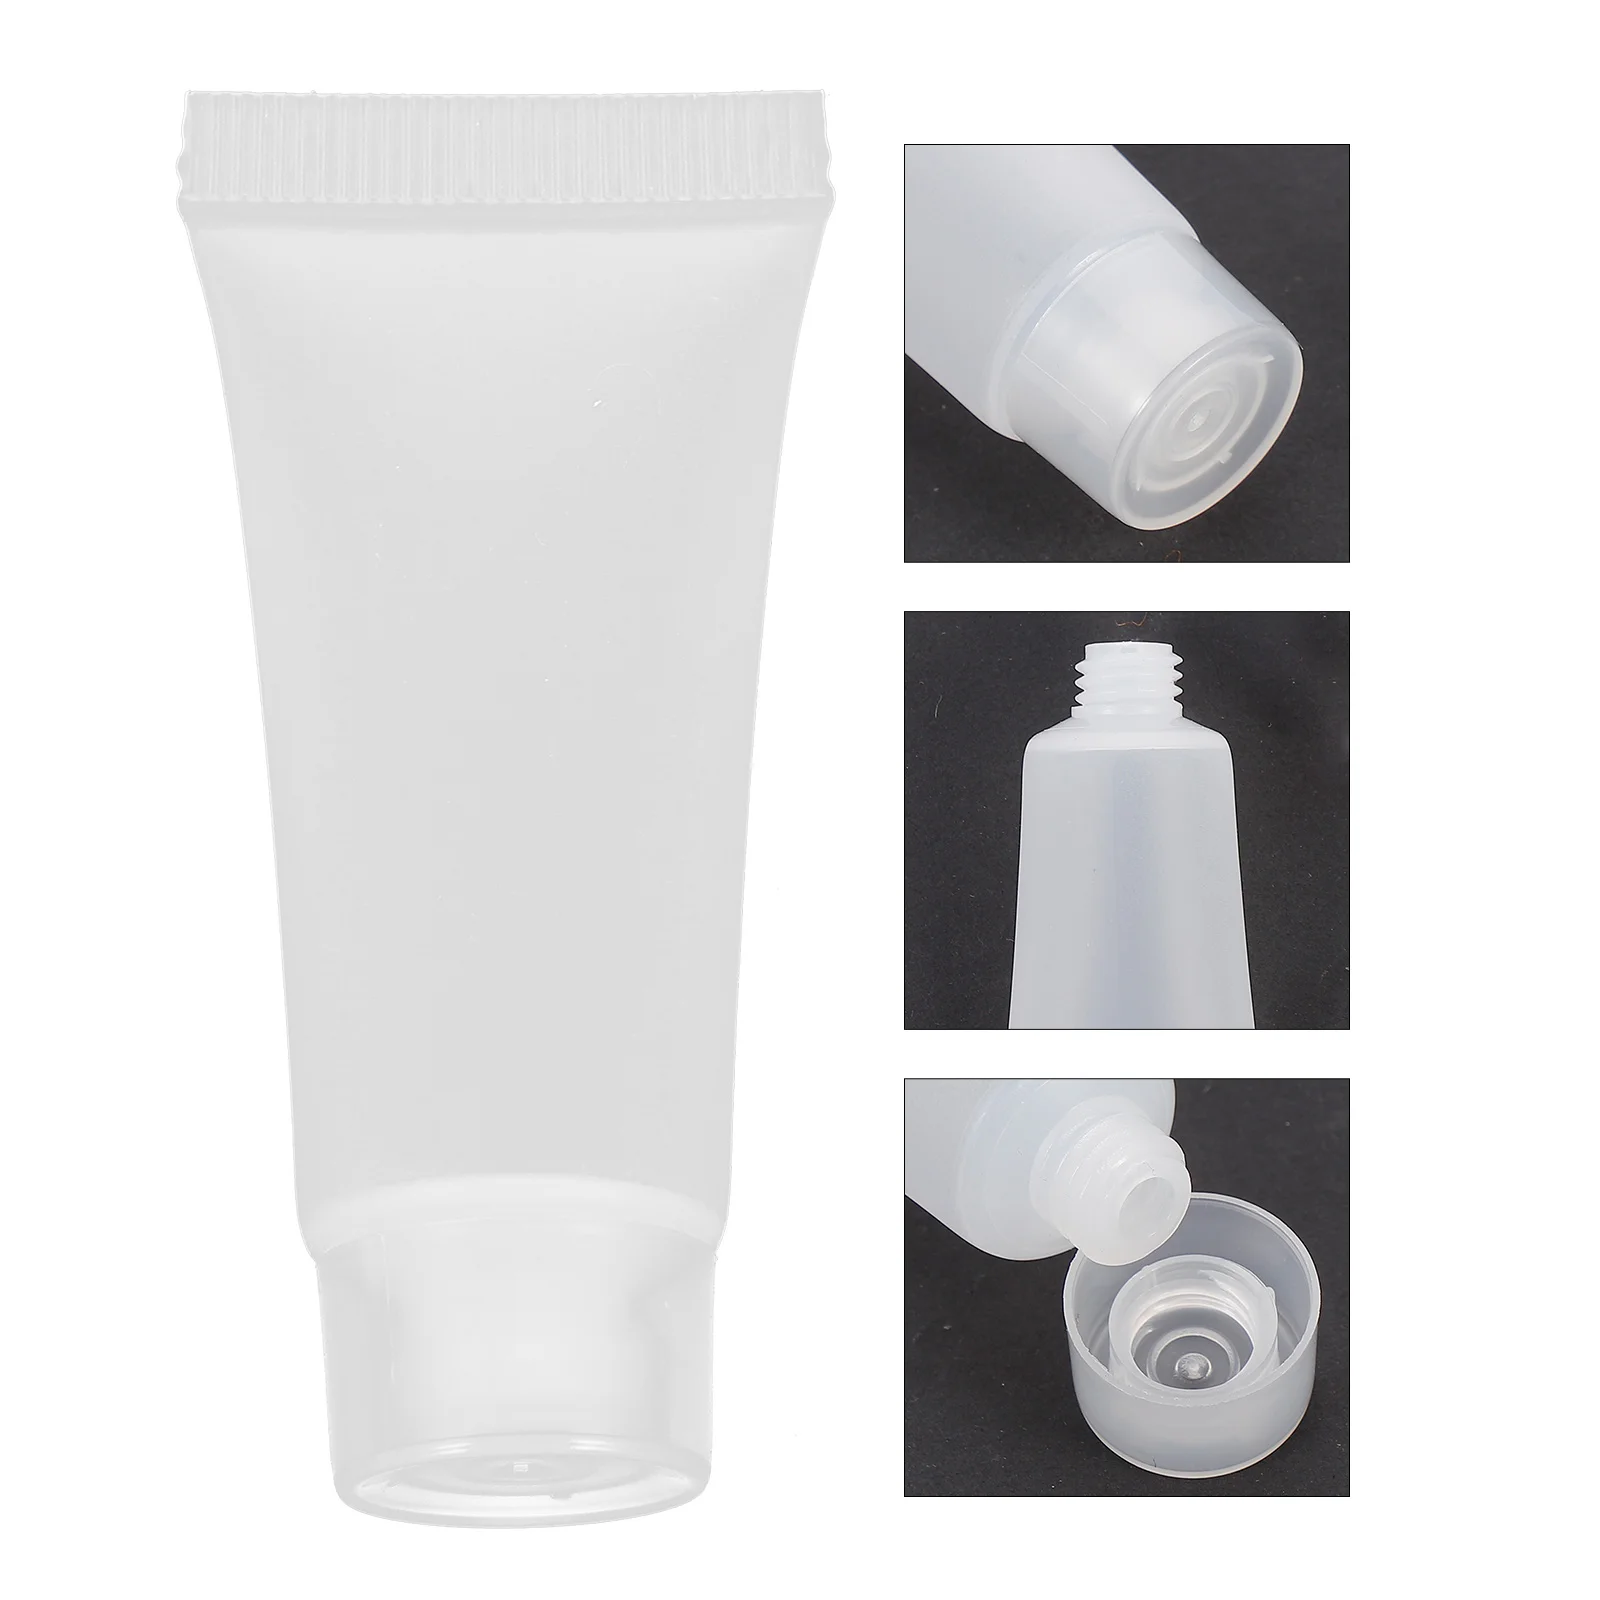 

50pcs 10ml Refillable Bottle Travel Squeeze Bottle Leakproof Storage Container with for Shampoo Facial Cleanser Toner Hand